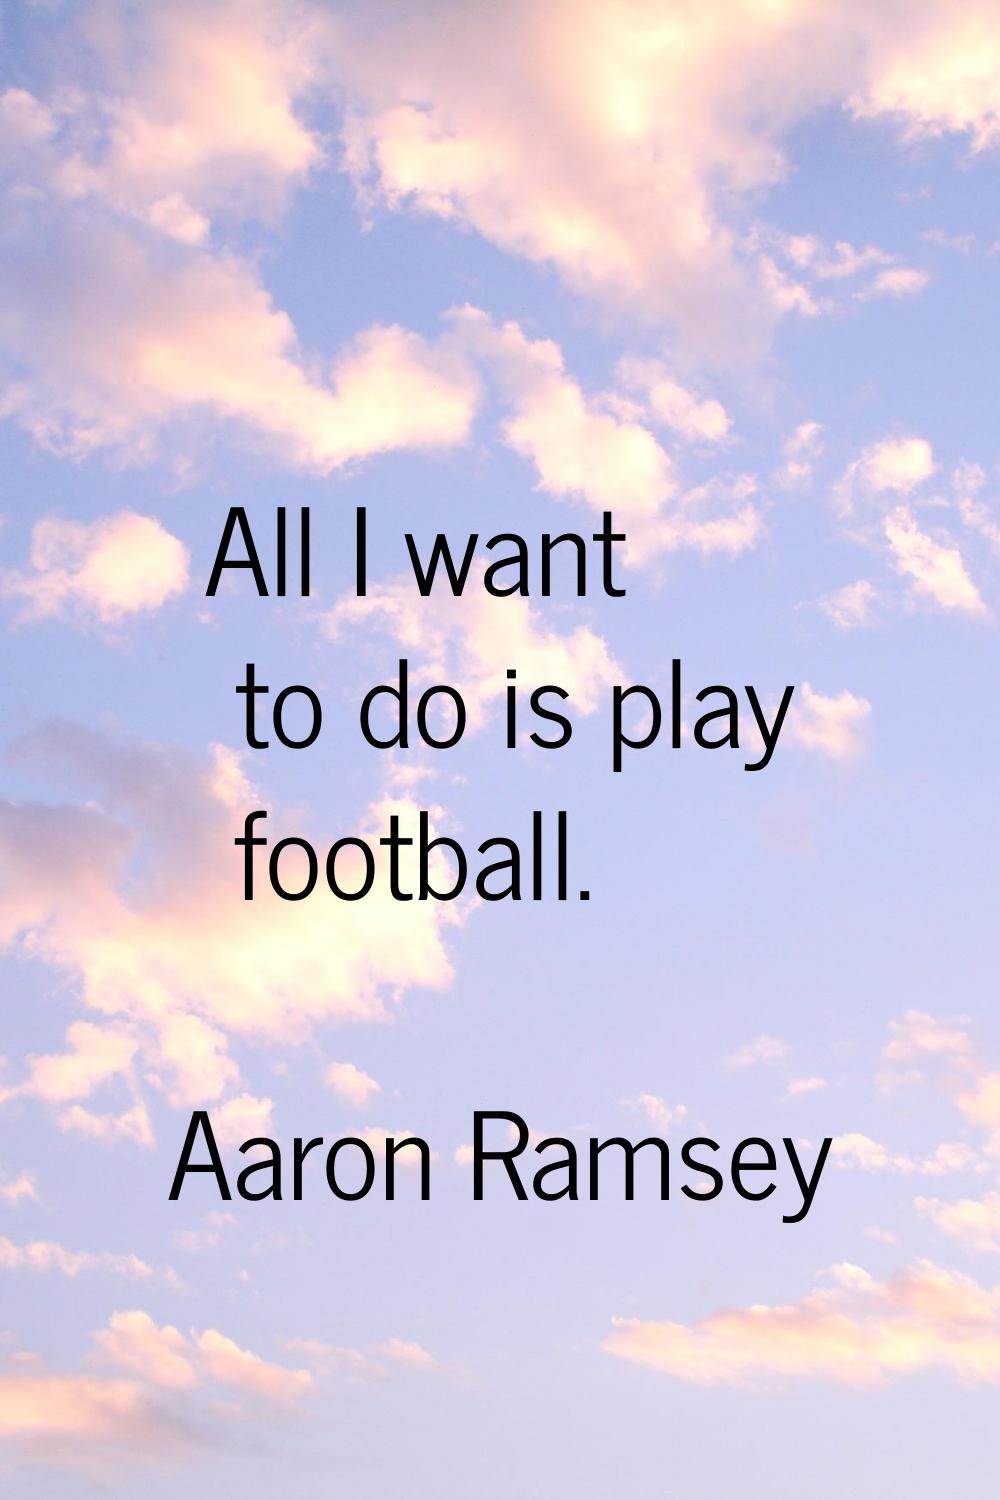 All I want to do is play football.